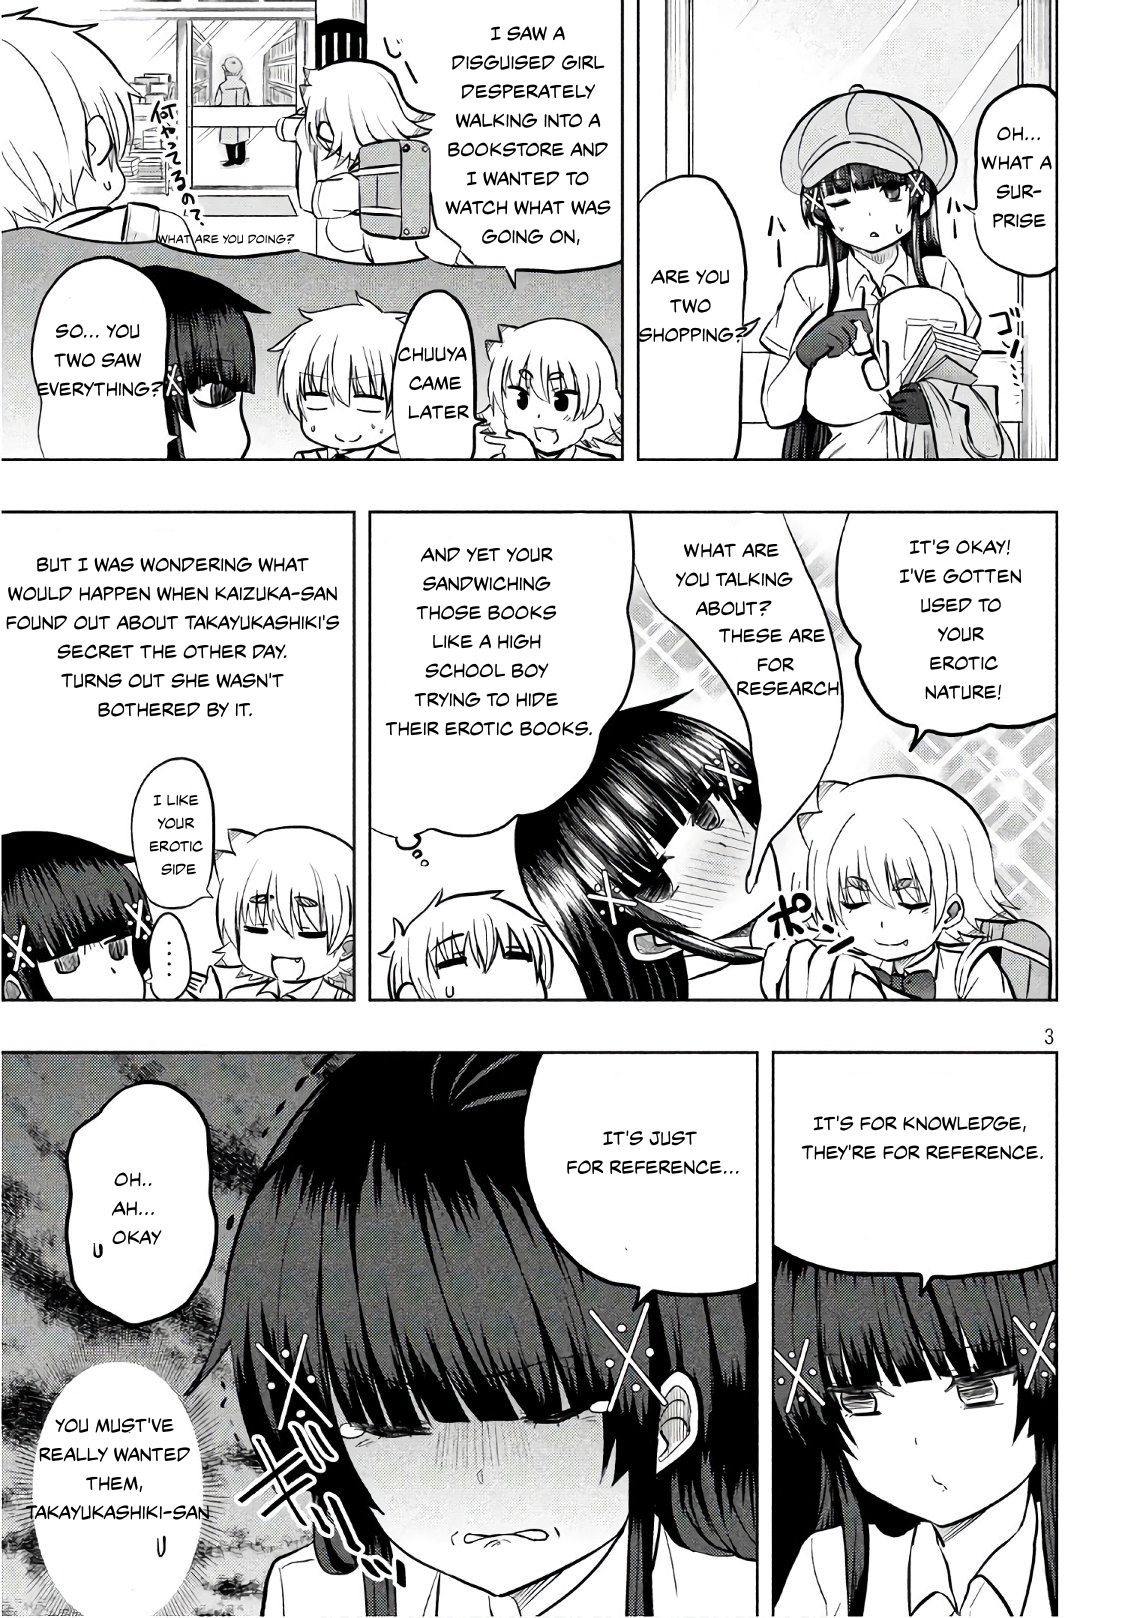 A Girl Who Is Very Well-Informed About Weird Knowledge, Takayukashiki Souko-San Chapter 25 #3